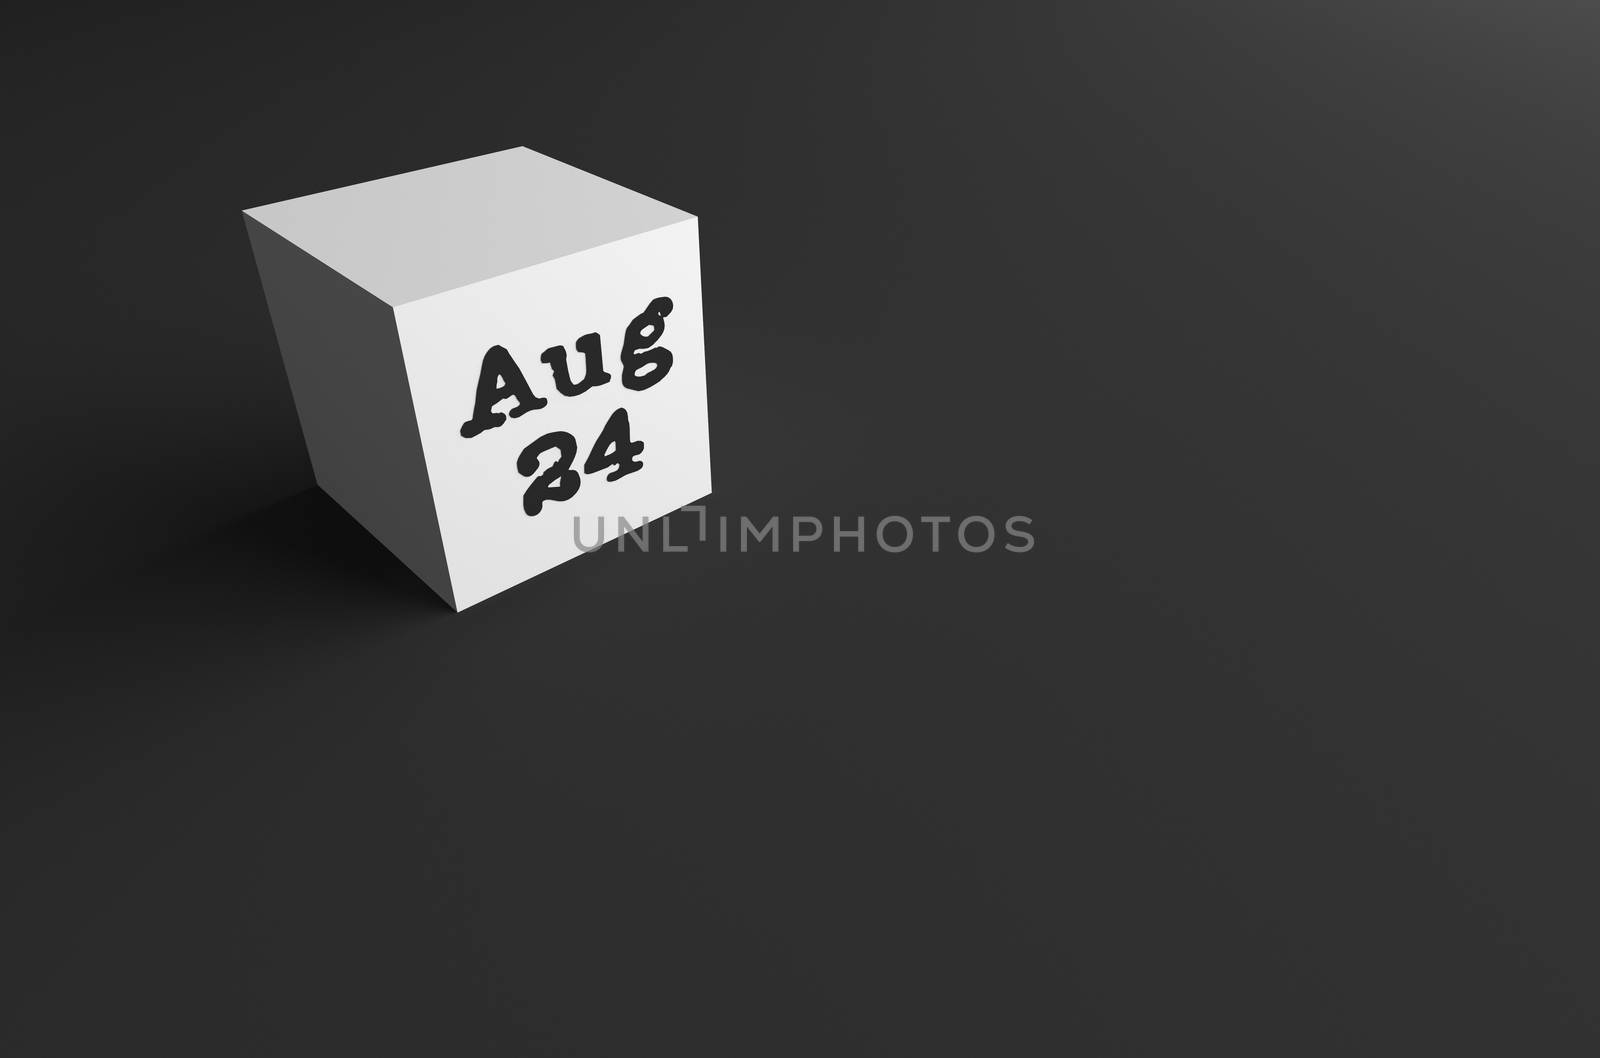 3D RENDERING OF Aug (ABBREVIATION OF AUGUST) 24 ON WHITE CUBE